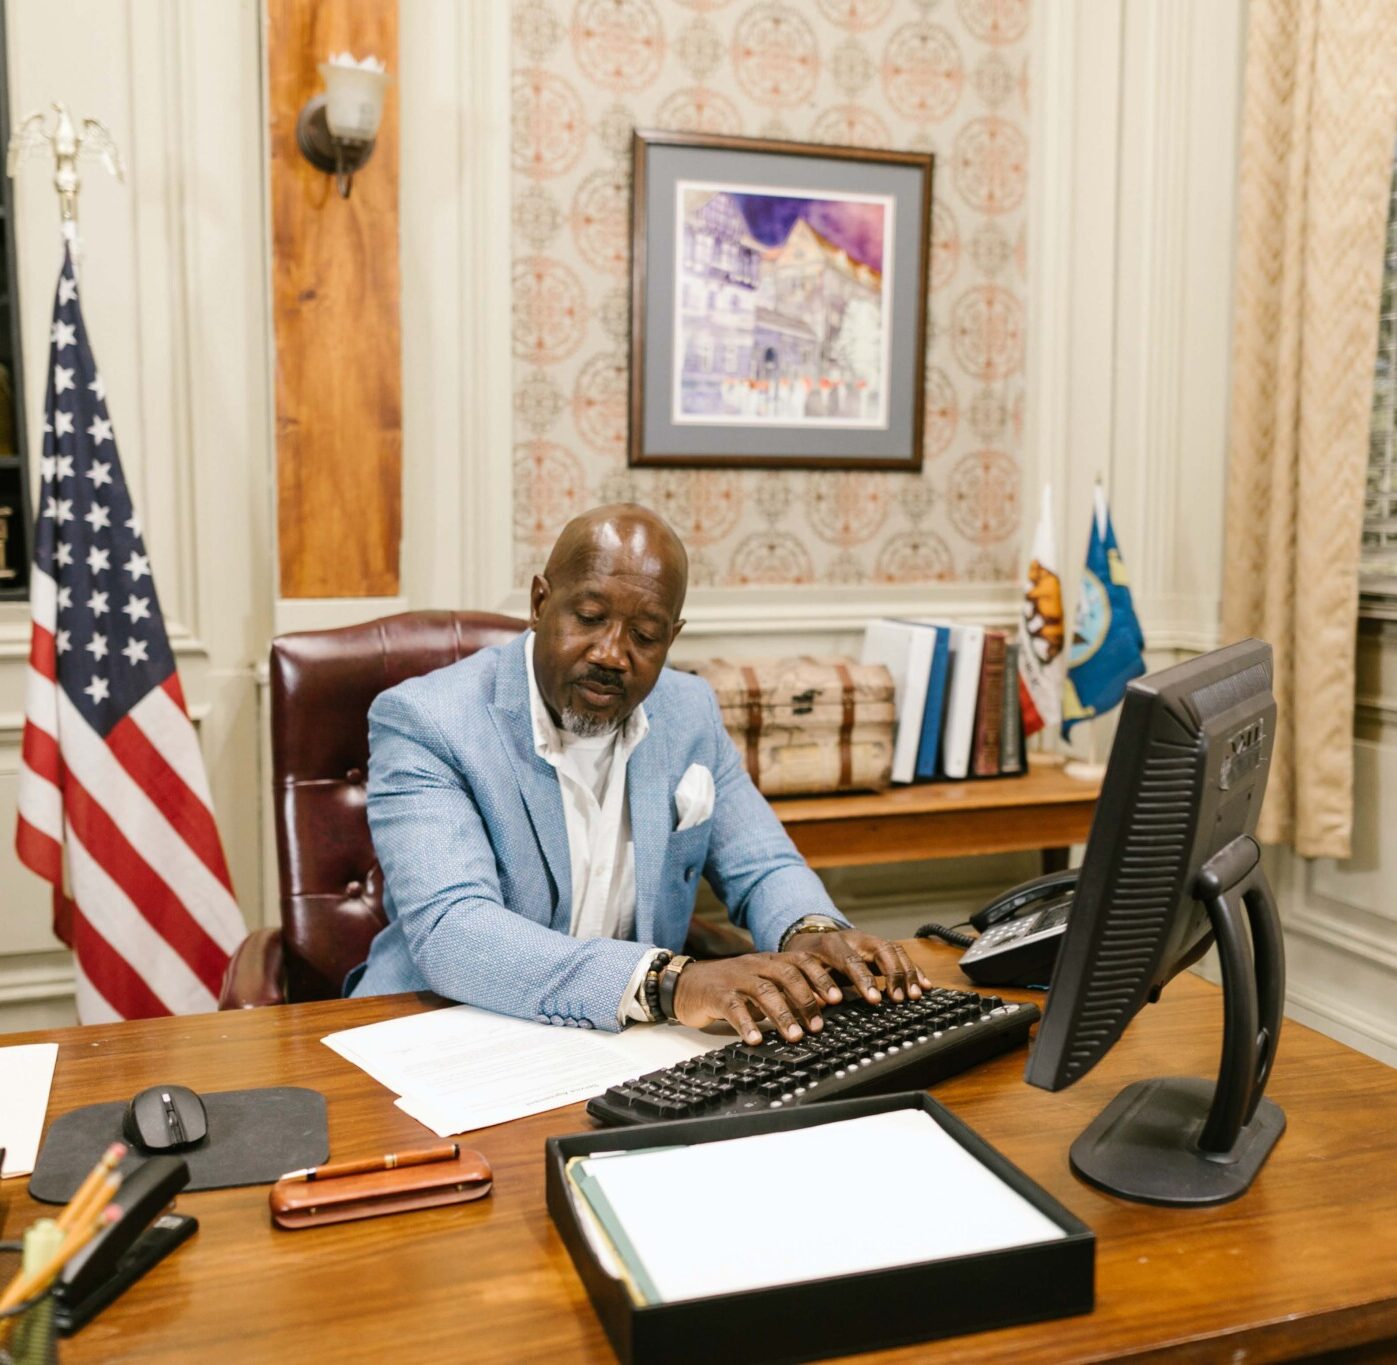 Lawyer in blue suit working on a computer in his office